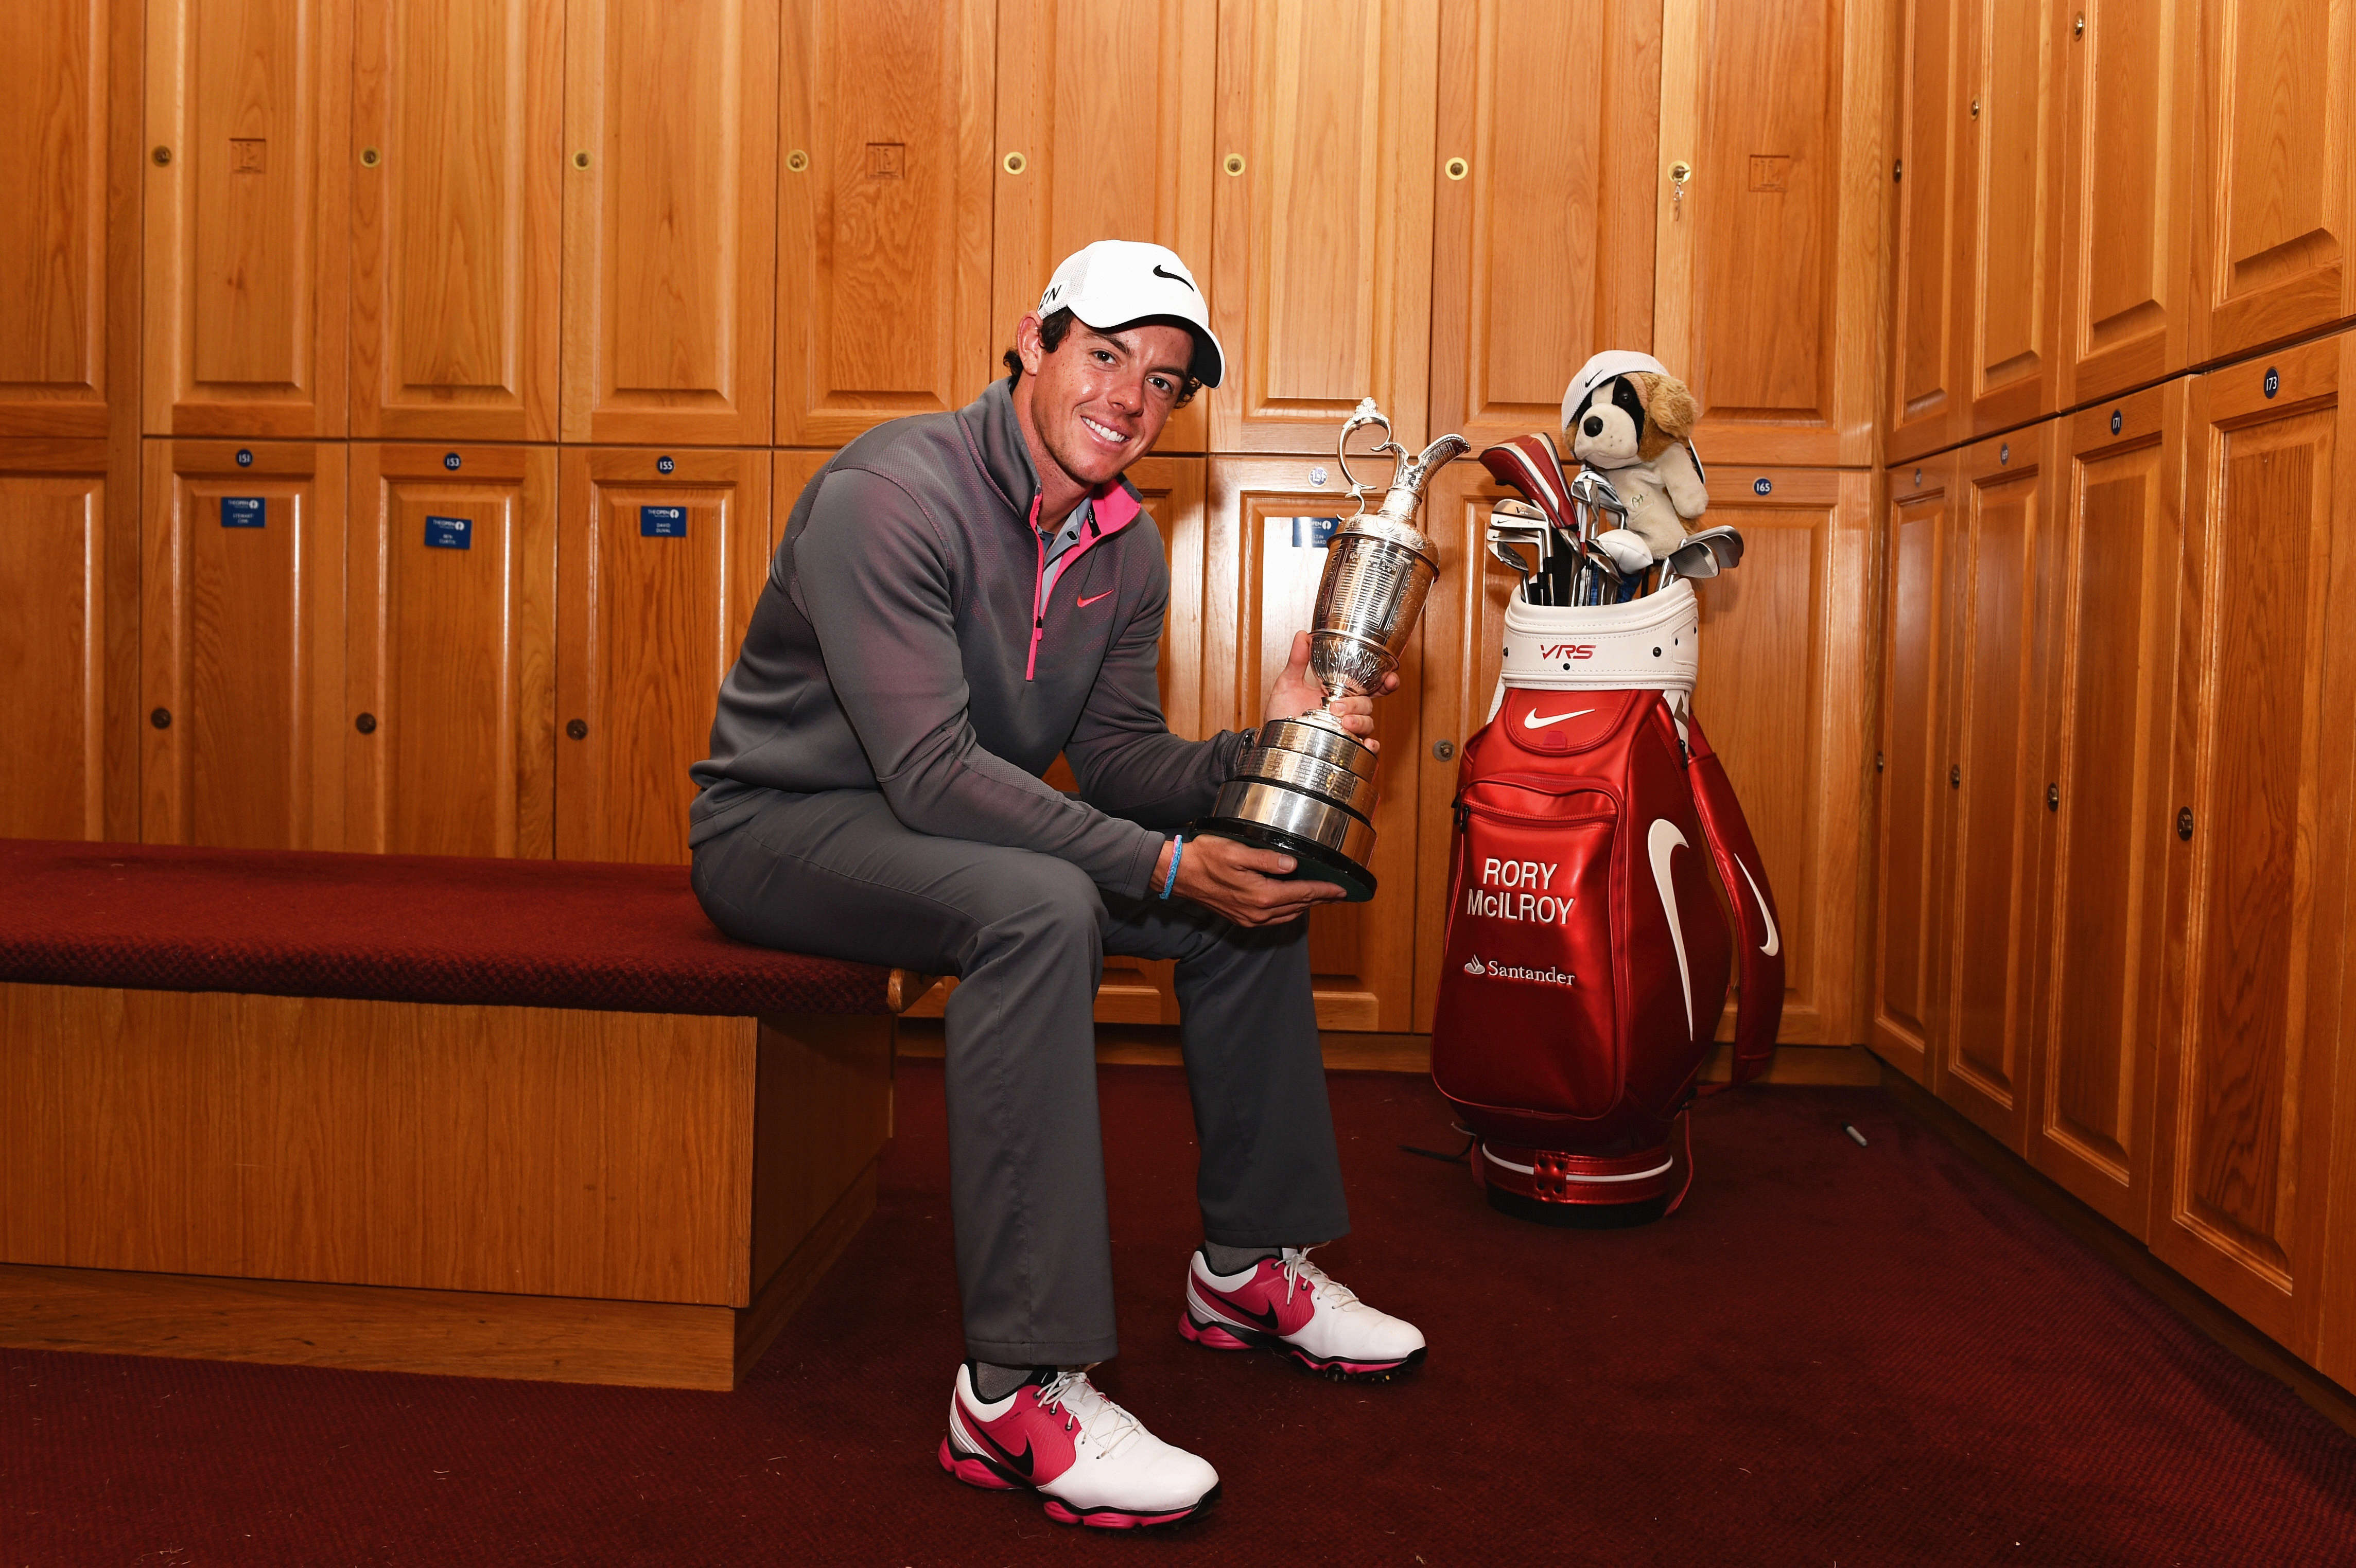 HOYLAKE, ENGLAND - JULY 20: Rory McIlroy of Northern Ireland poses with the Claret Jug in the locker room after his two-stroke victory in The 143rd Open Championship at Royal Liverpool on July 20, 2014 in Hoylake, England. (Photo by Ian Walton/R&A/R&A via Getty Images)